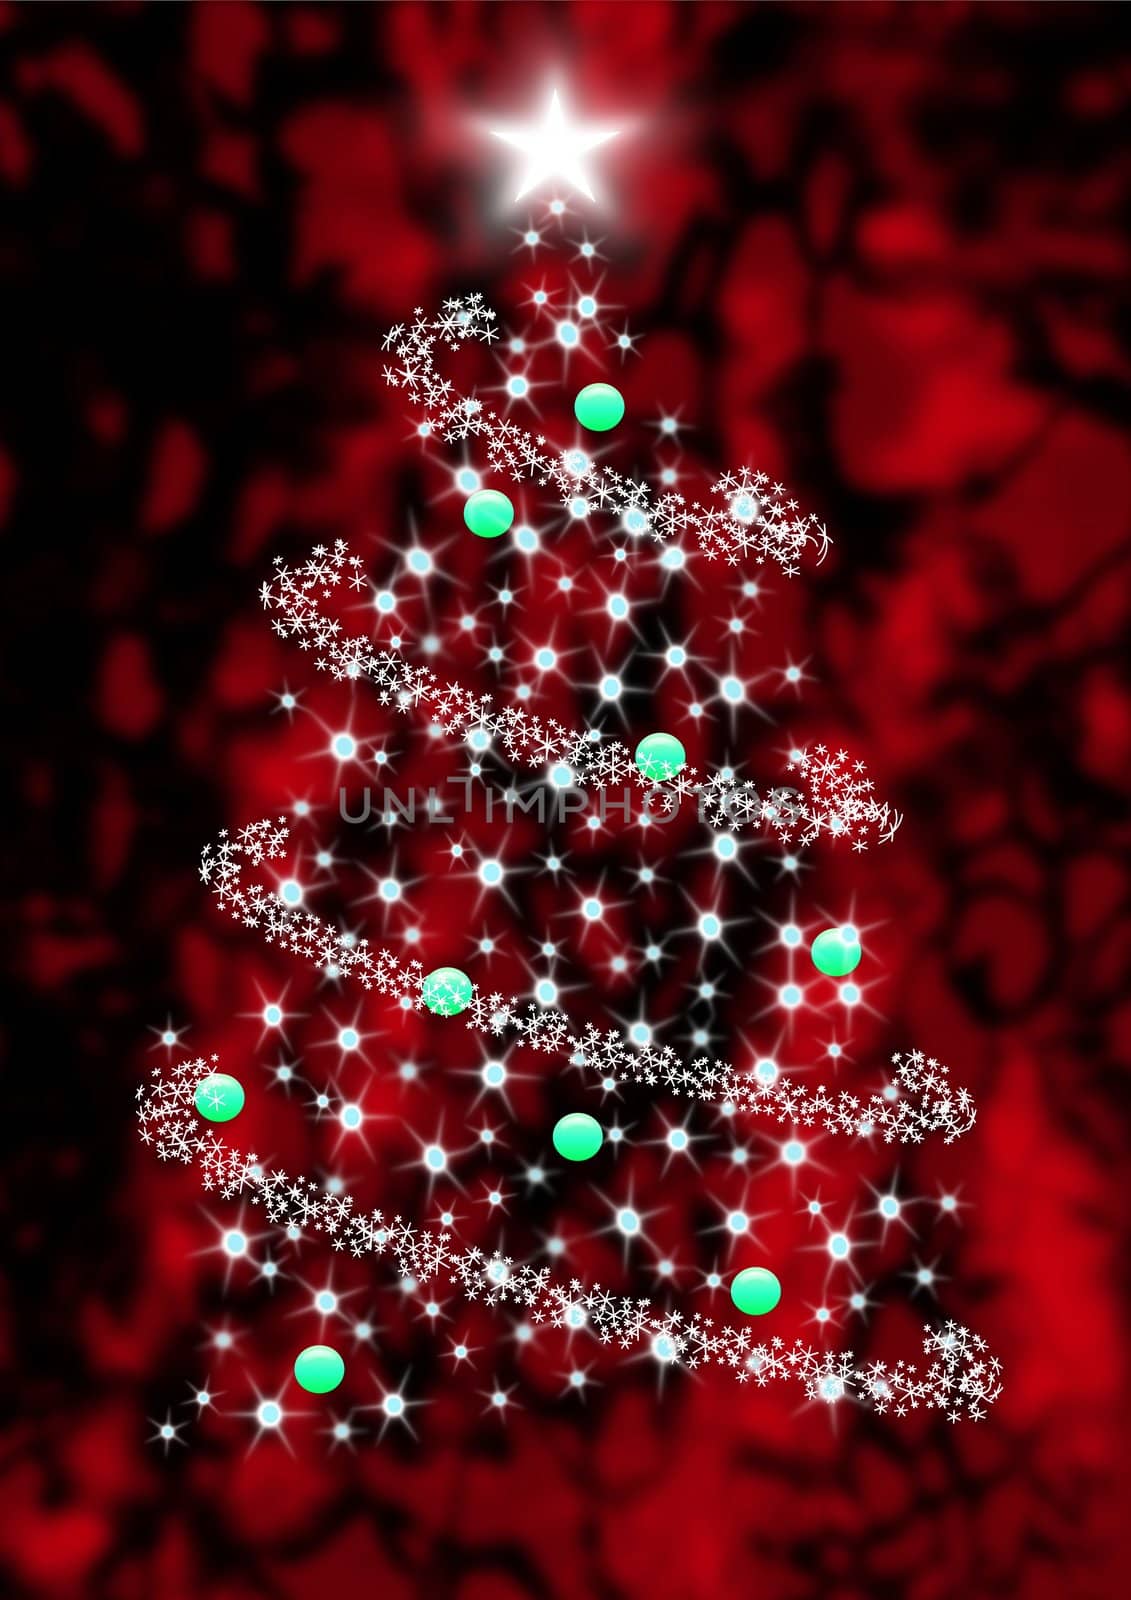 Abstract Christmas tree illustration on an red background.